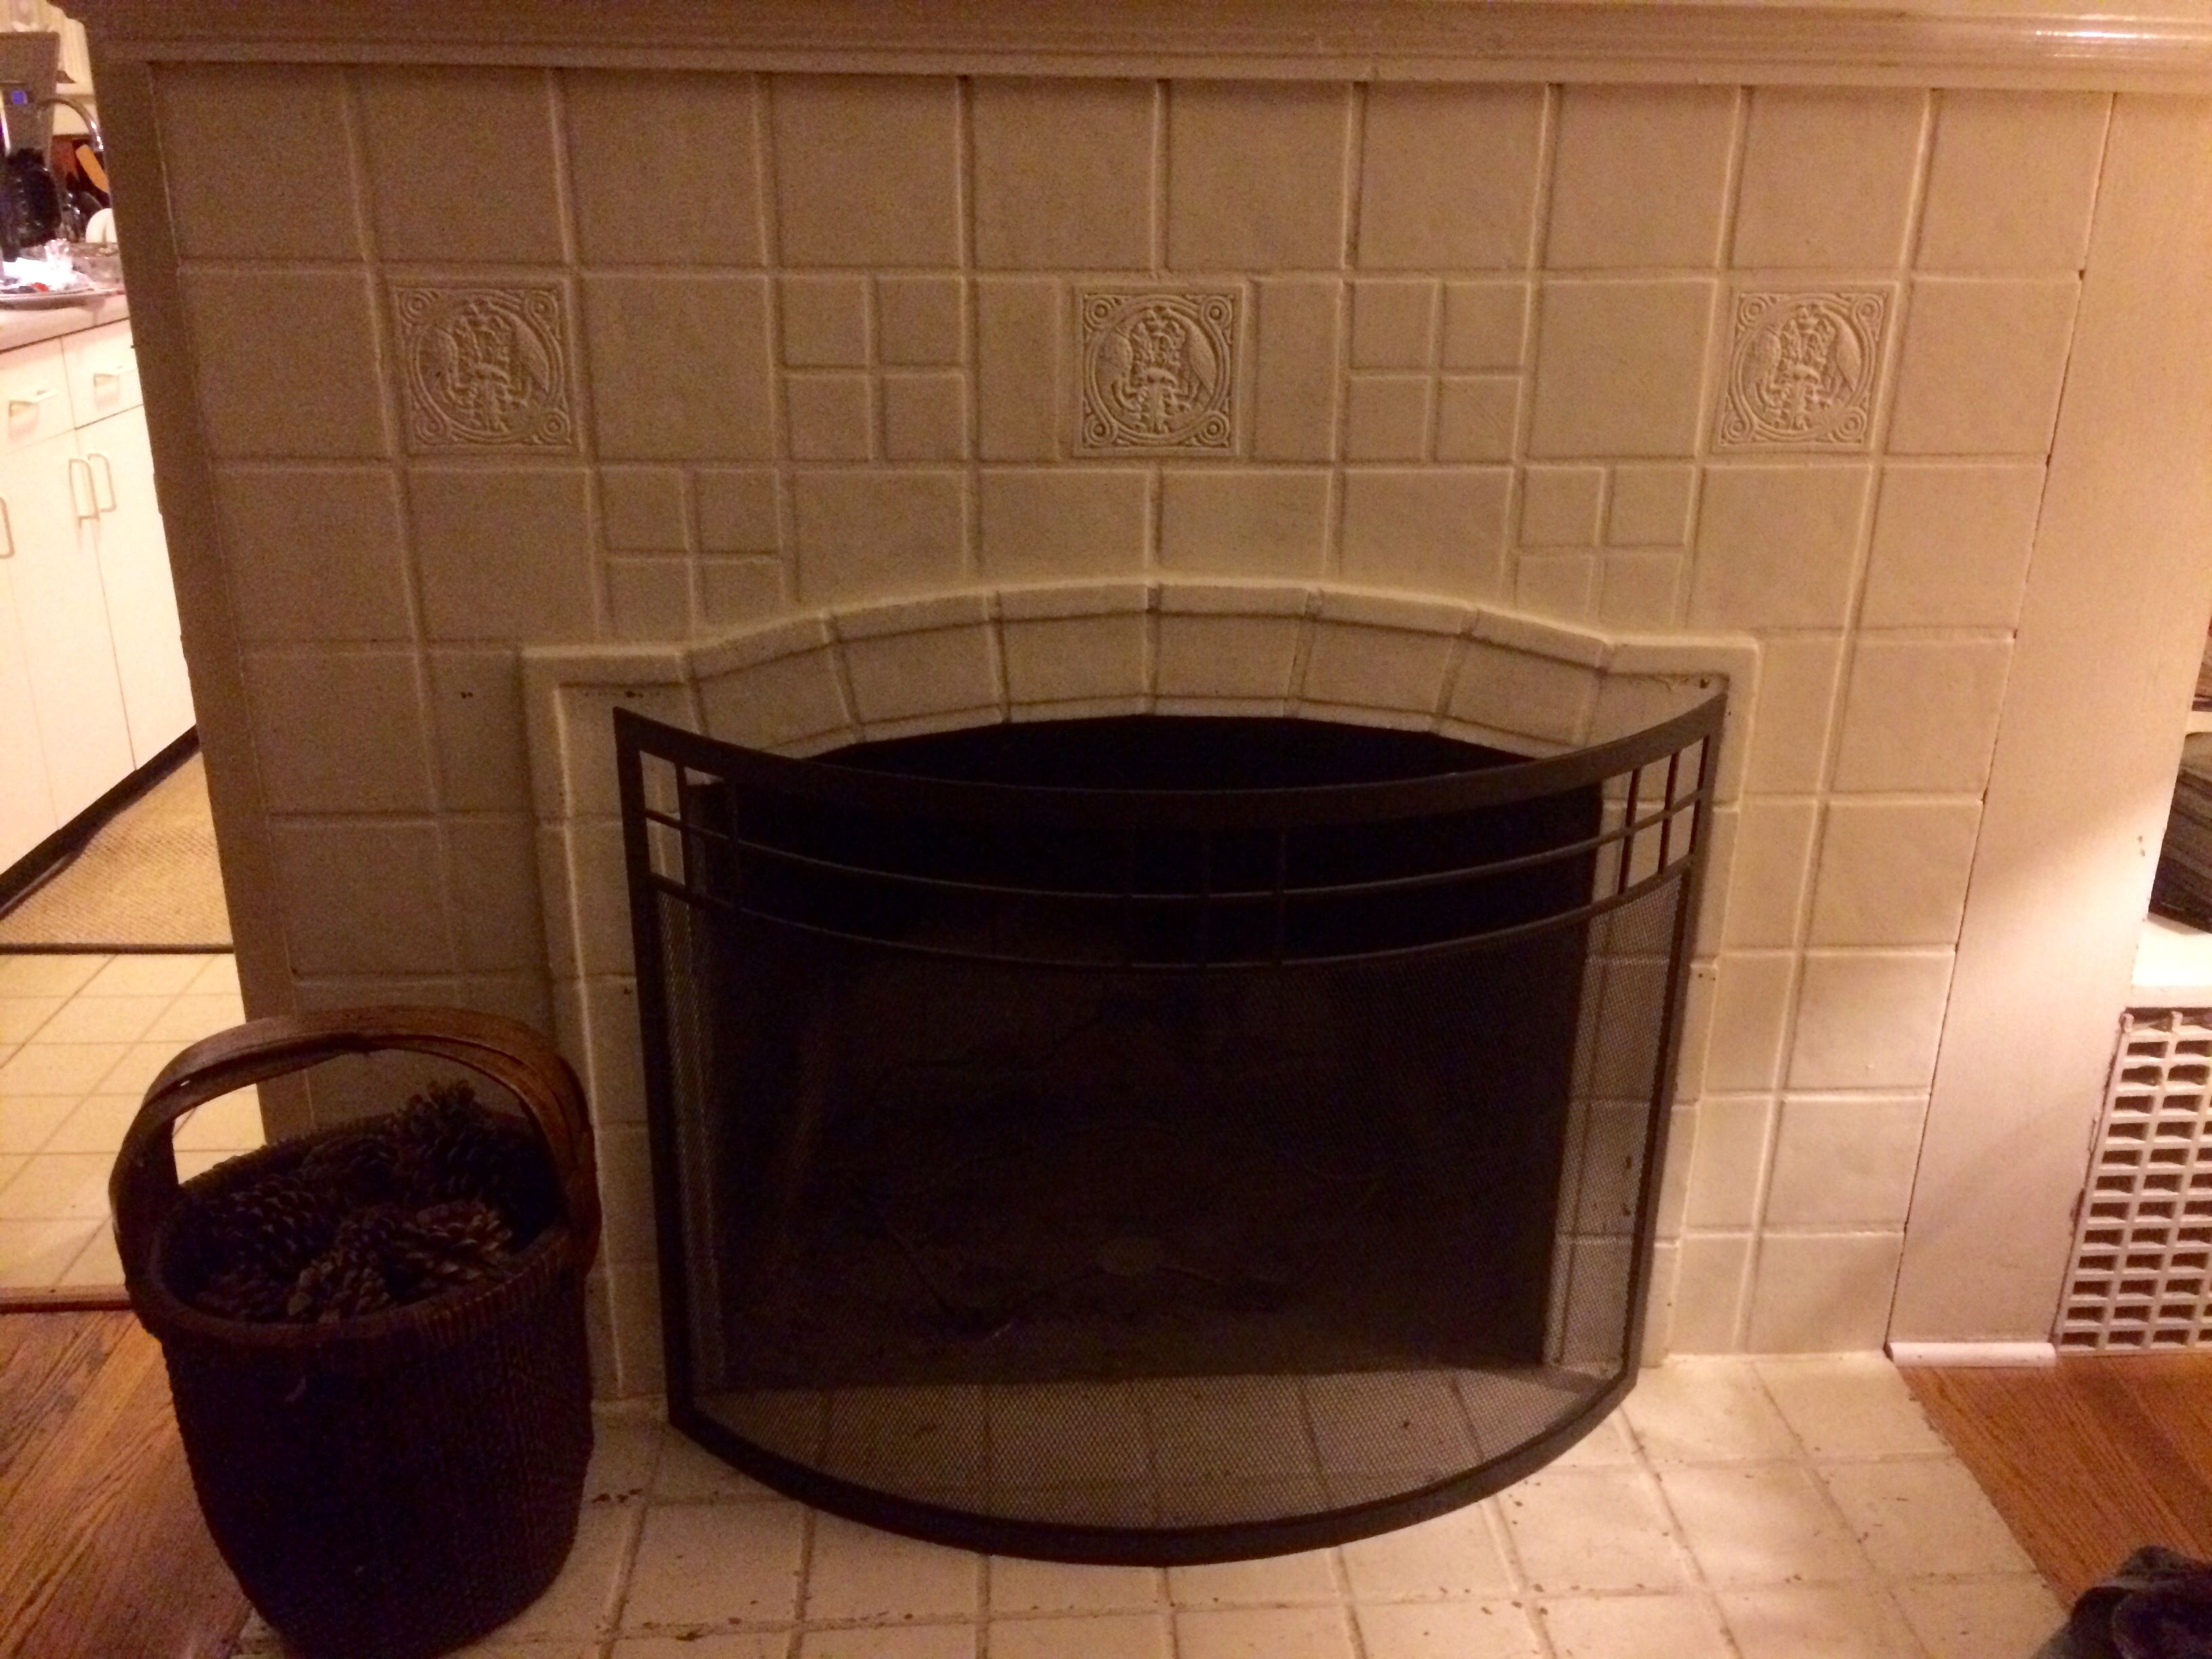 Pictures Of Tiled Fireplaces Best Of Hamilton Tile Fireplace Surround C 1928 In the Seattle Wa